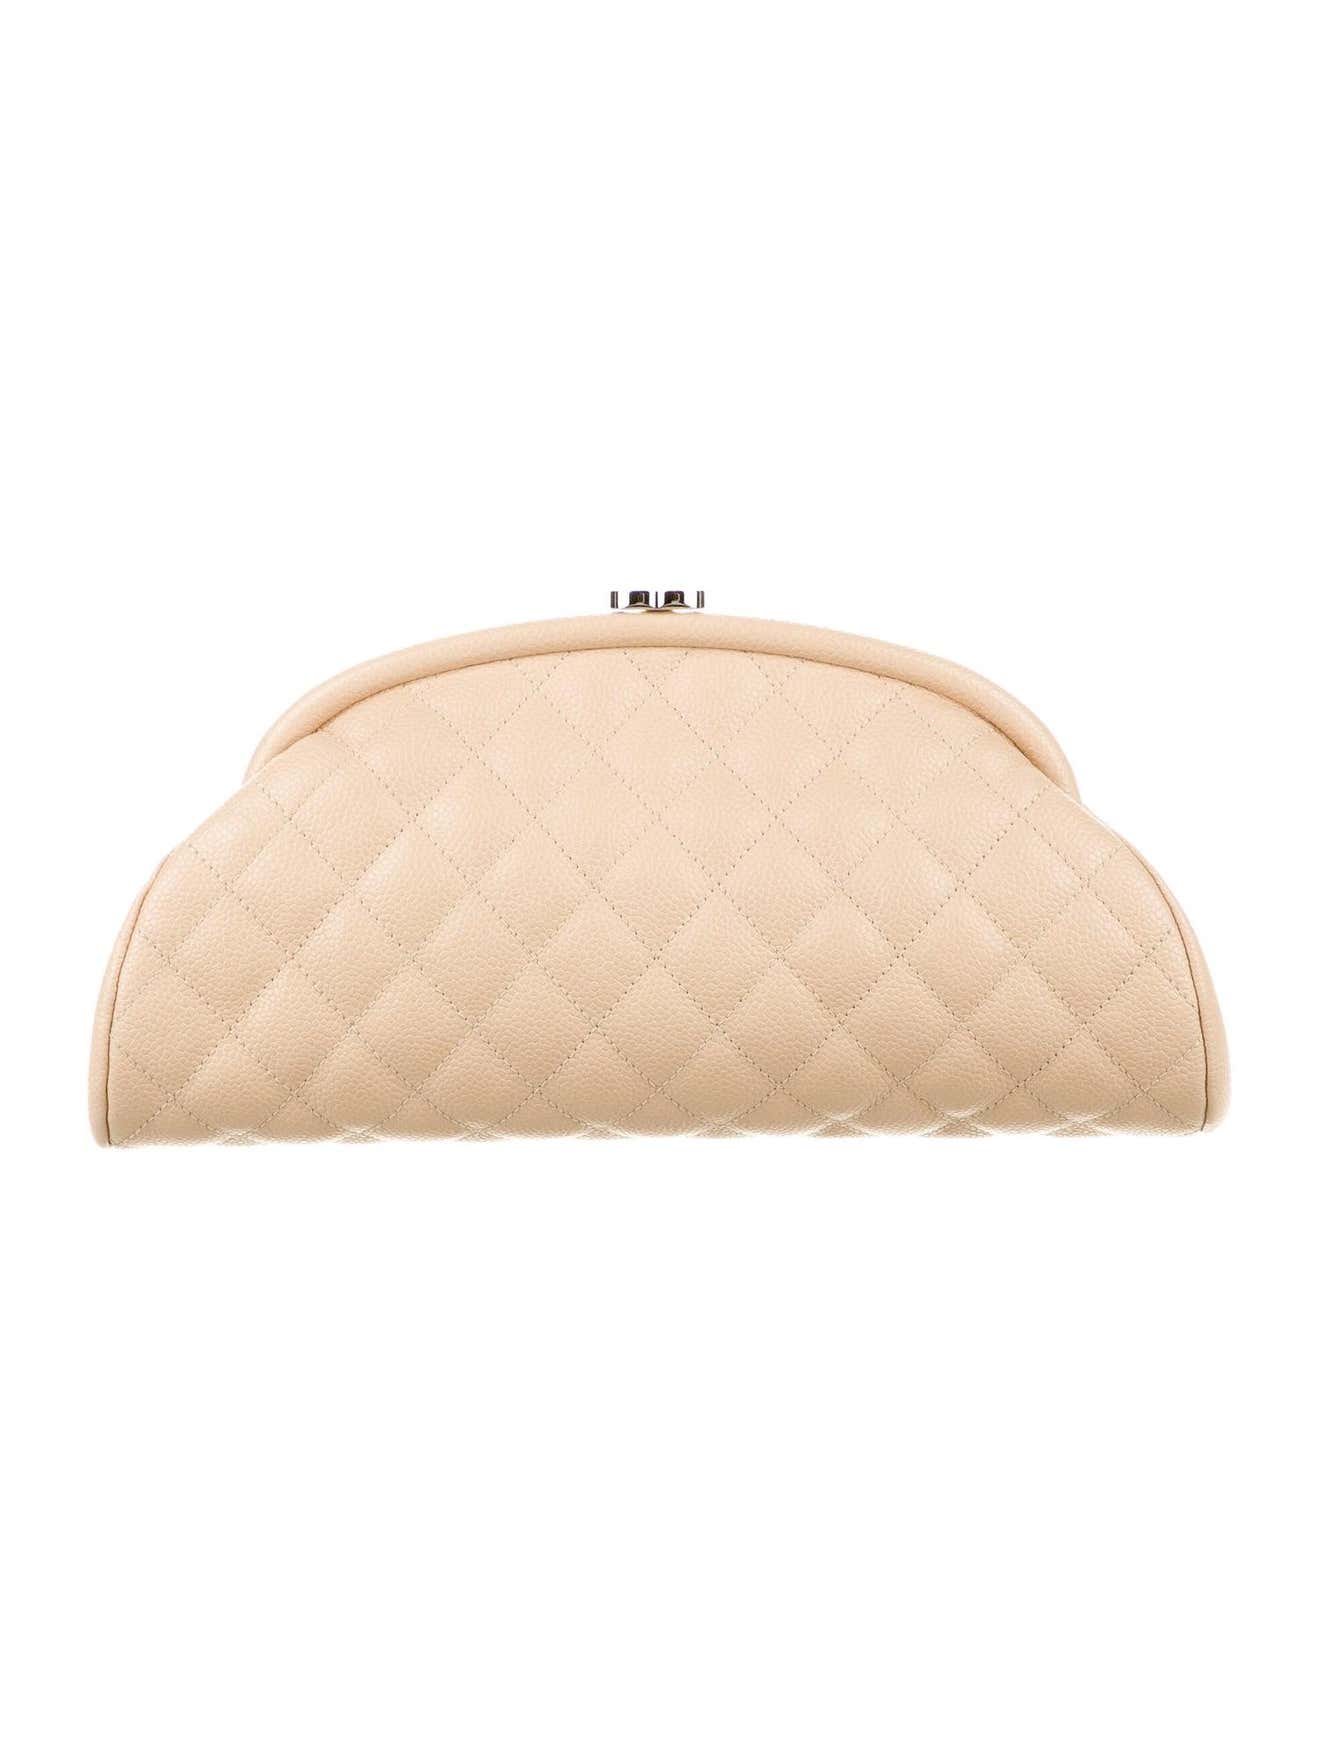 Chanel Classic Vintage Beige CC Diamond Quilted Caviar Timeless